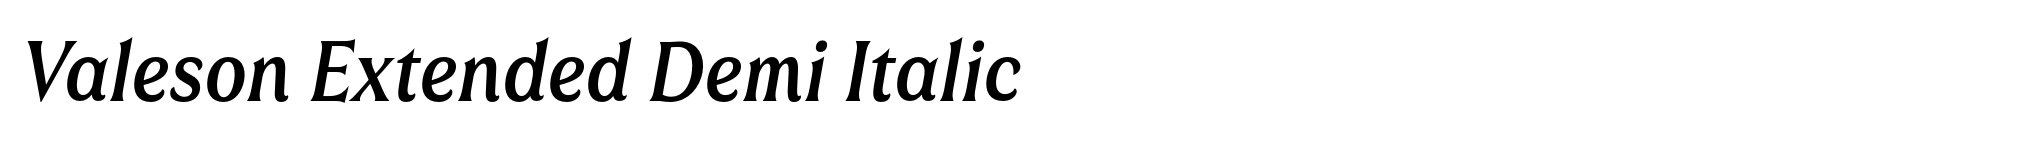 Valeson Extended Demi Italic image